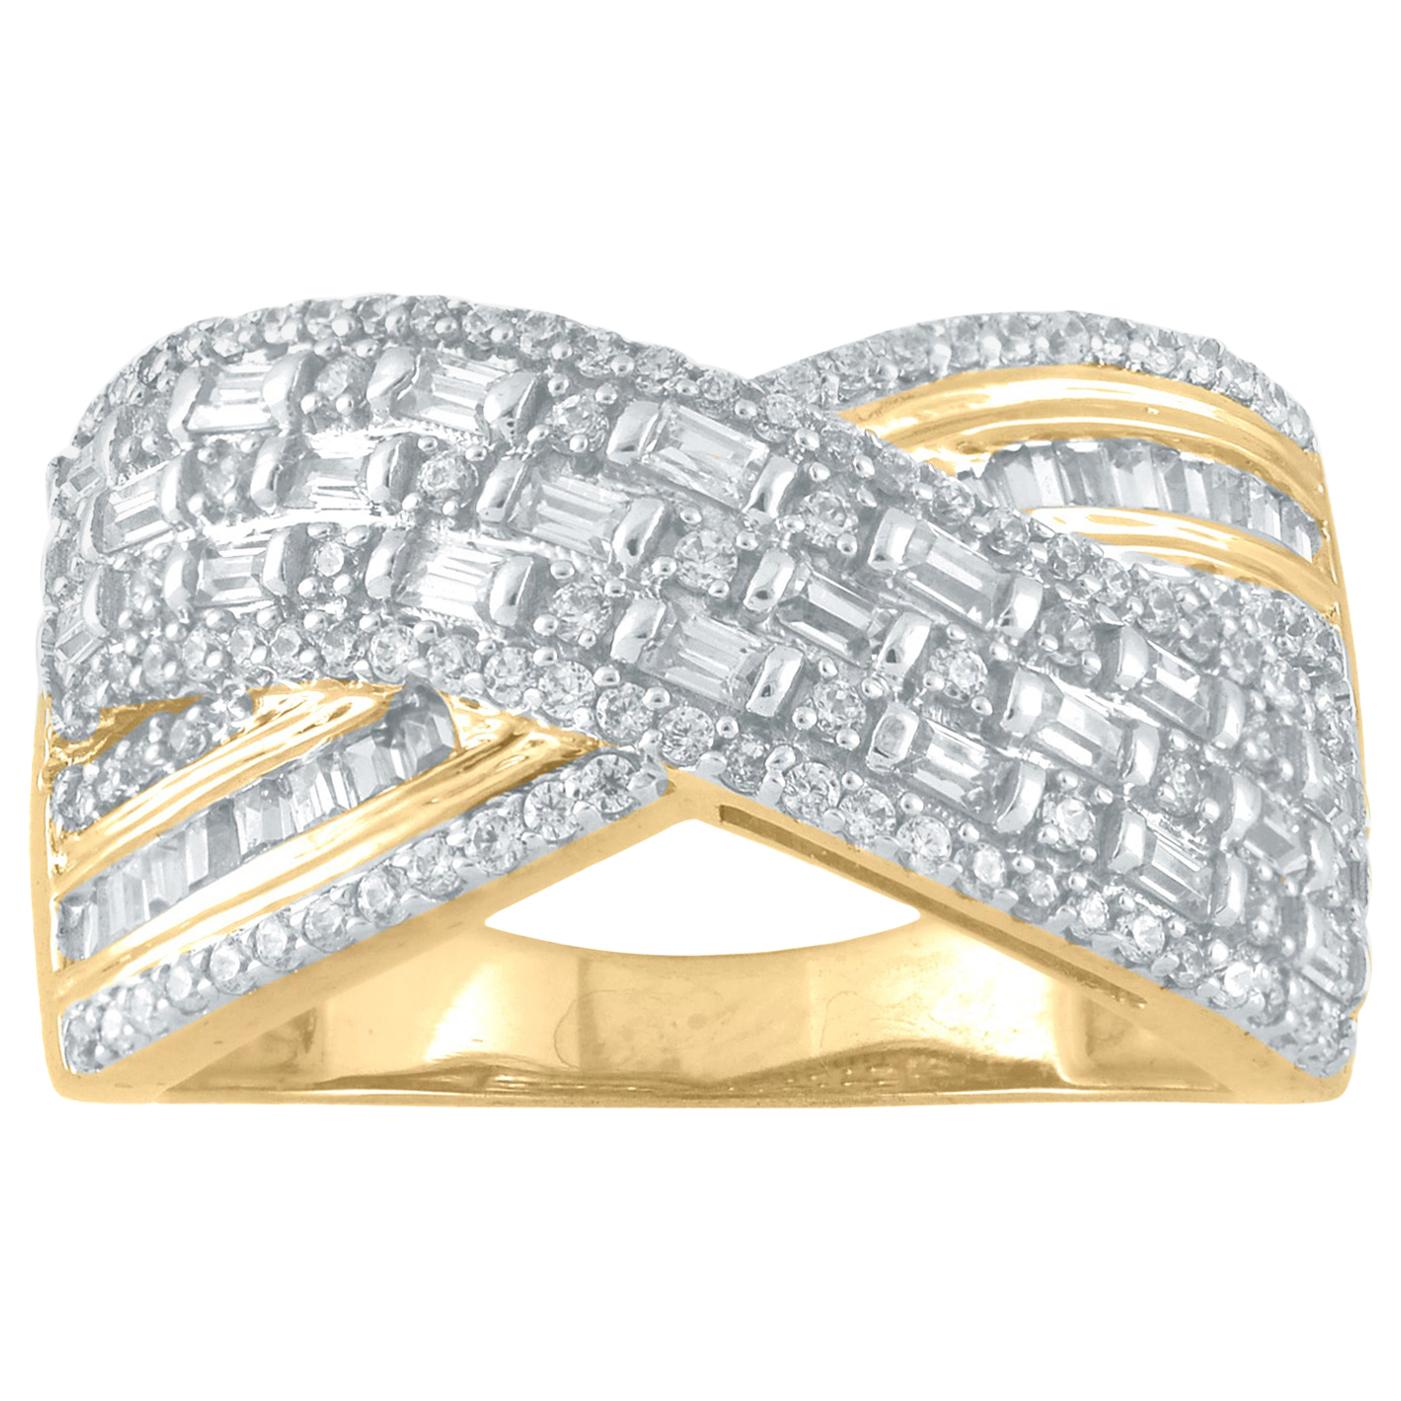 TJD 0.75 Carat Round & Baguette Diamond 14K Yellow Gold Crossover Fashion Ring